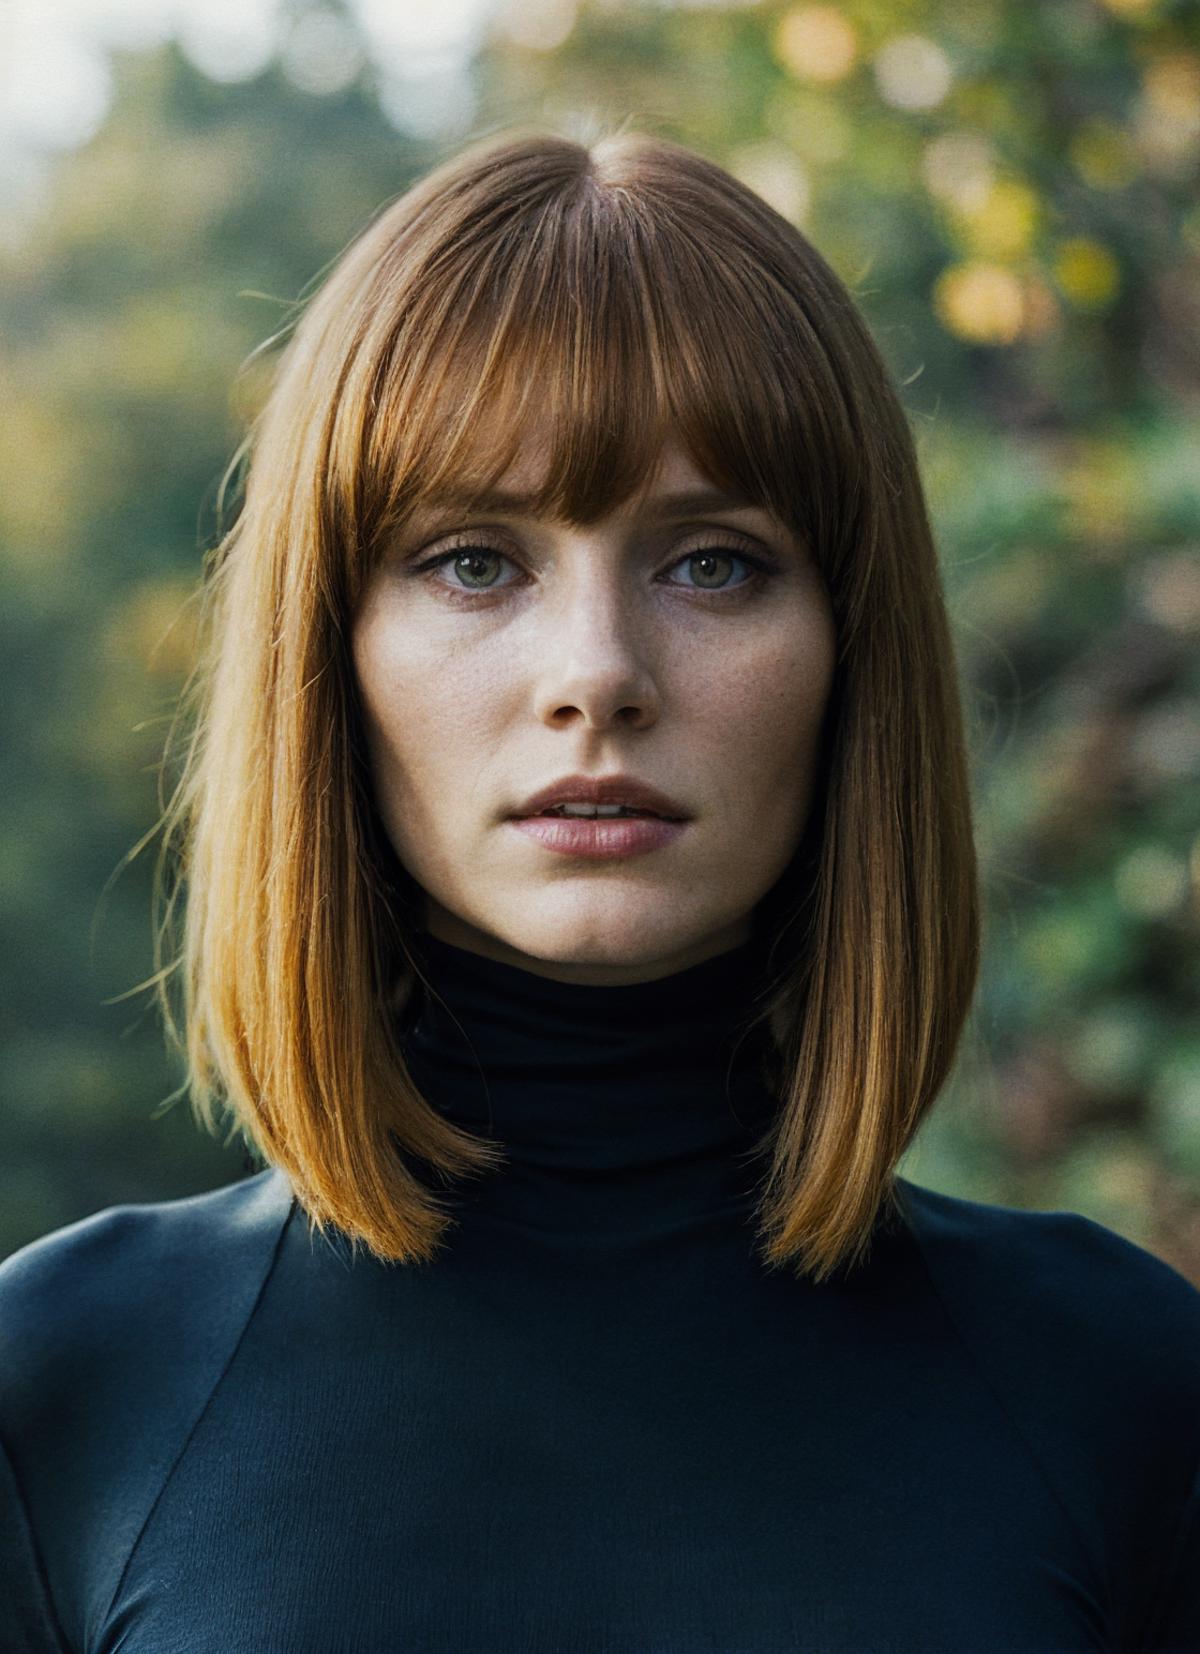 A woman with red hair wearing a black sweater.